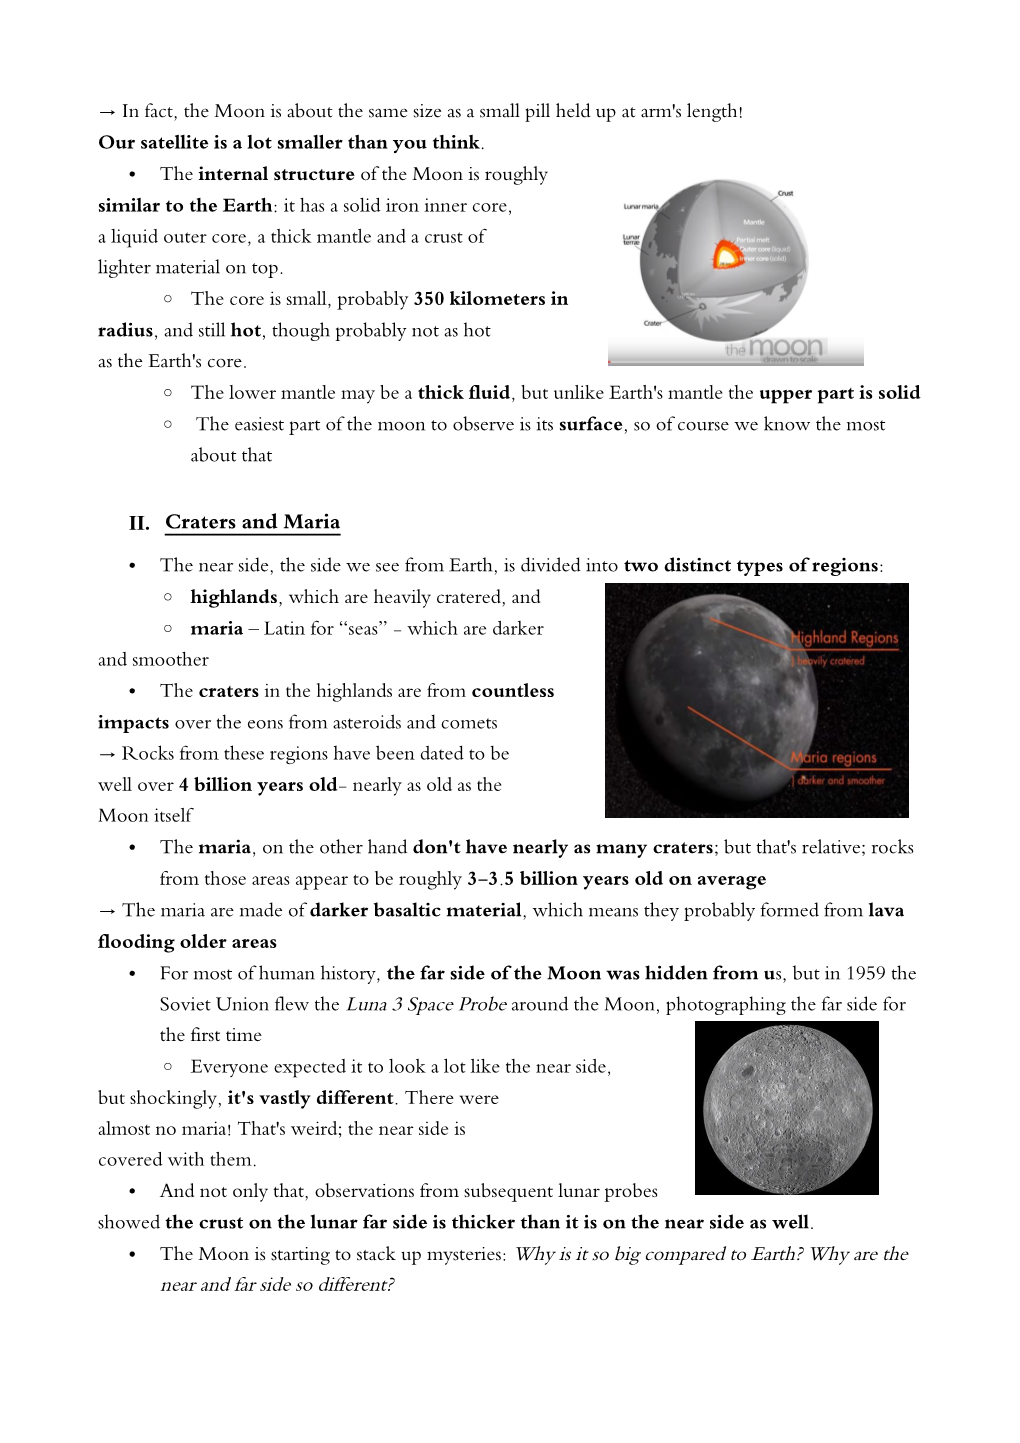 What Are the Different Layers of the Moon?